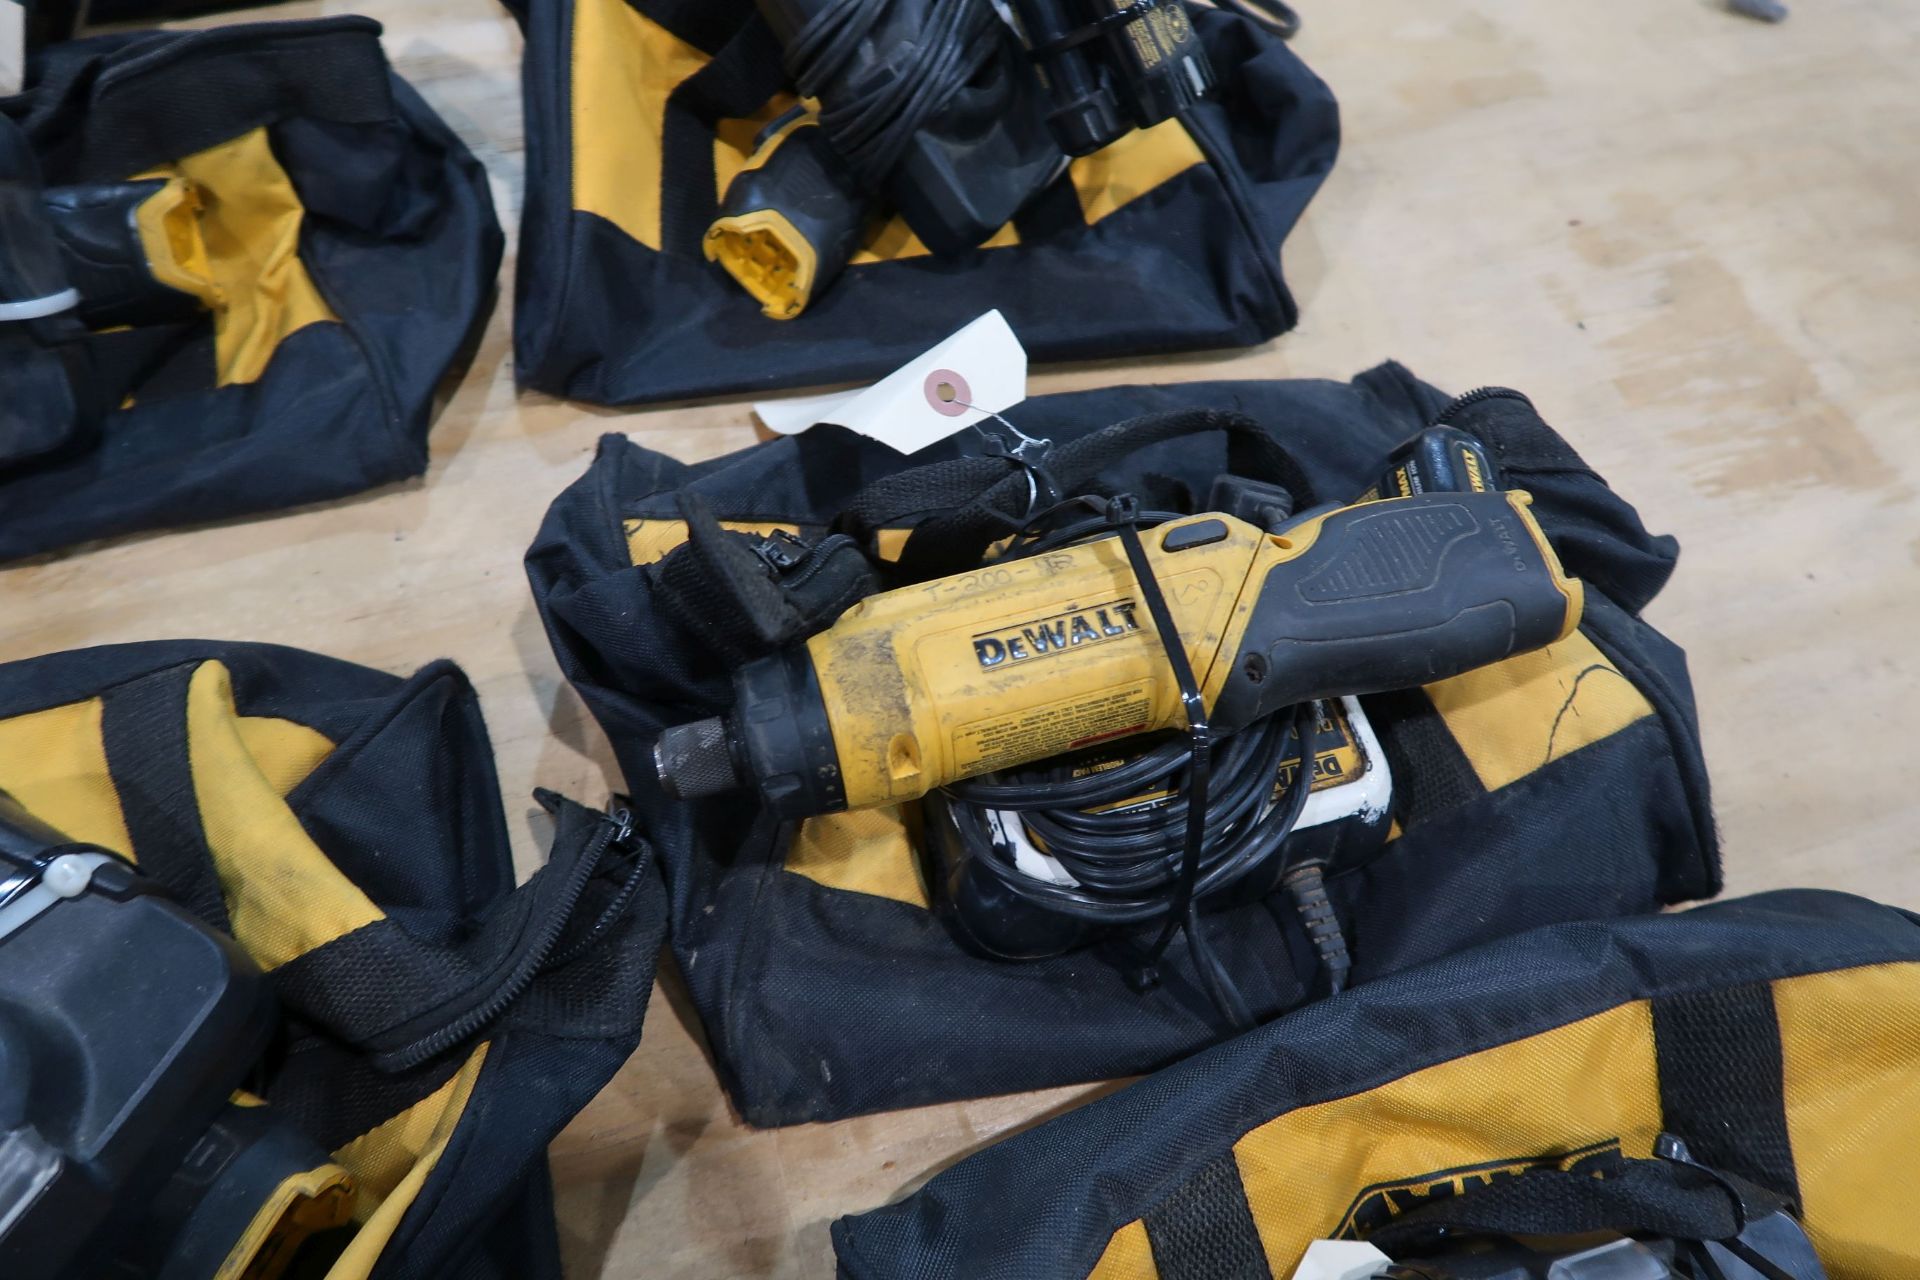 MISCELLANEOUS DEWALT CORDLESS SCREWDRIVERS AND DRILL DRIVERS WITH CHARGERS - Image 3 of 3